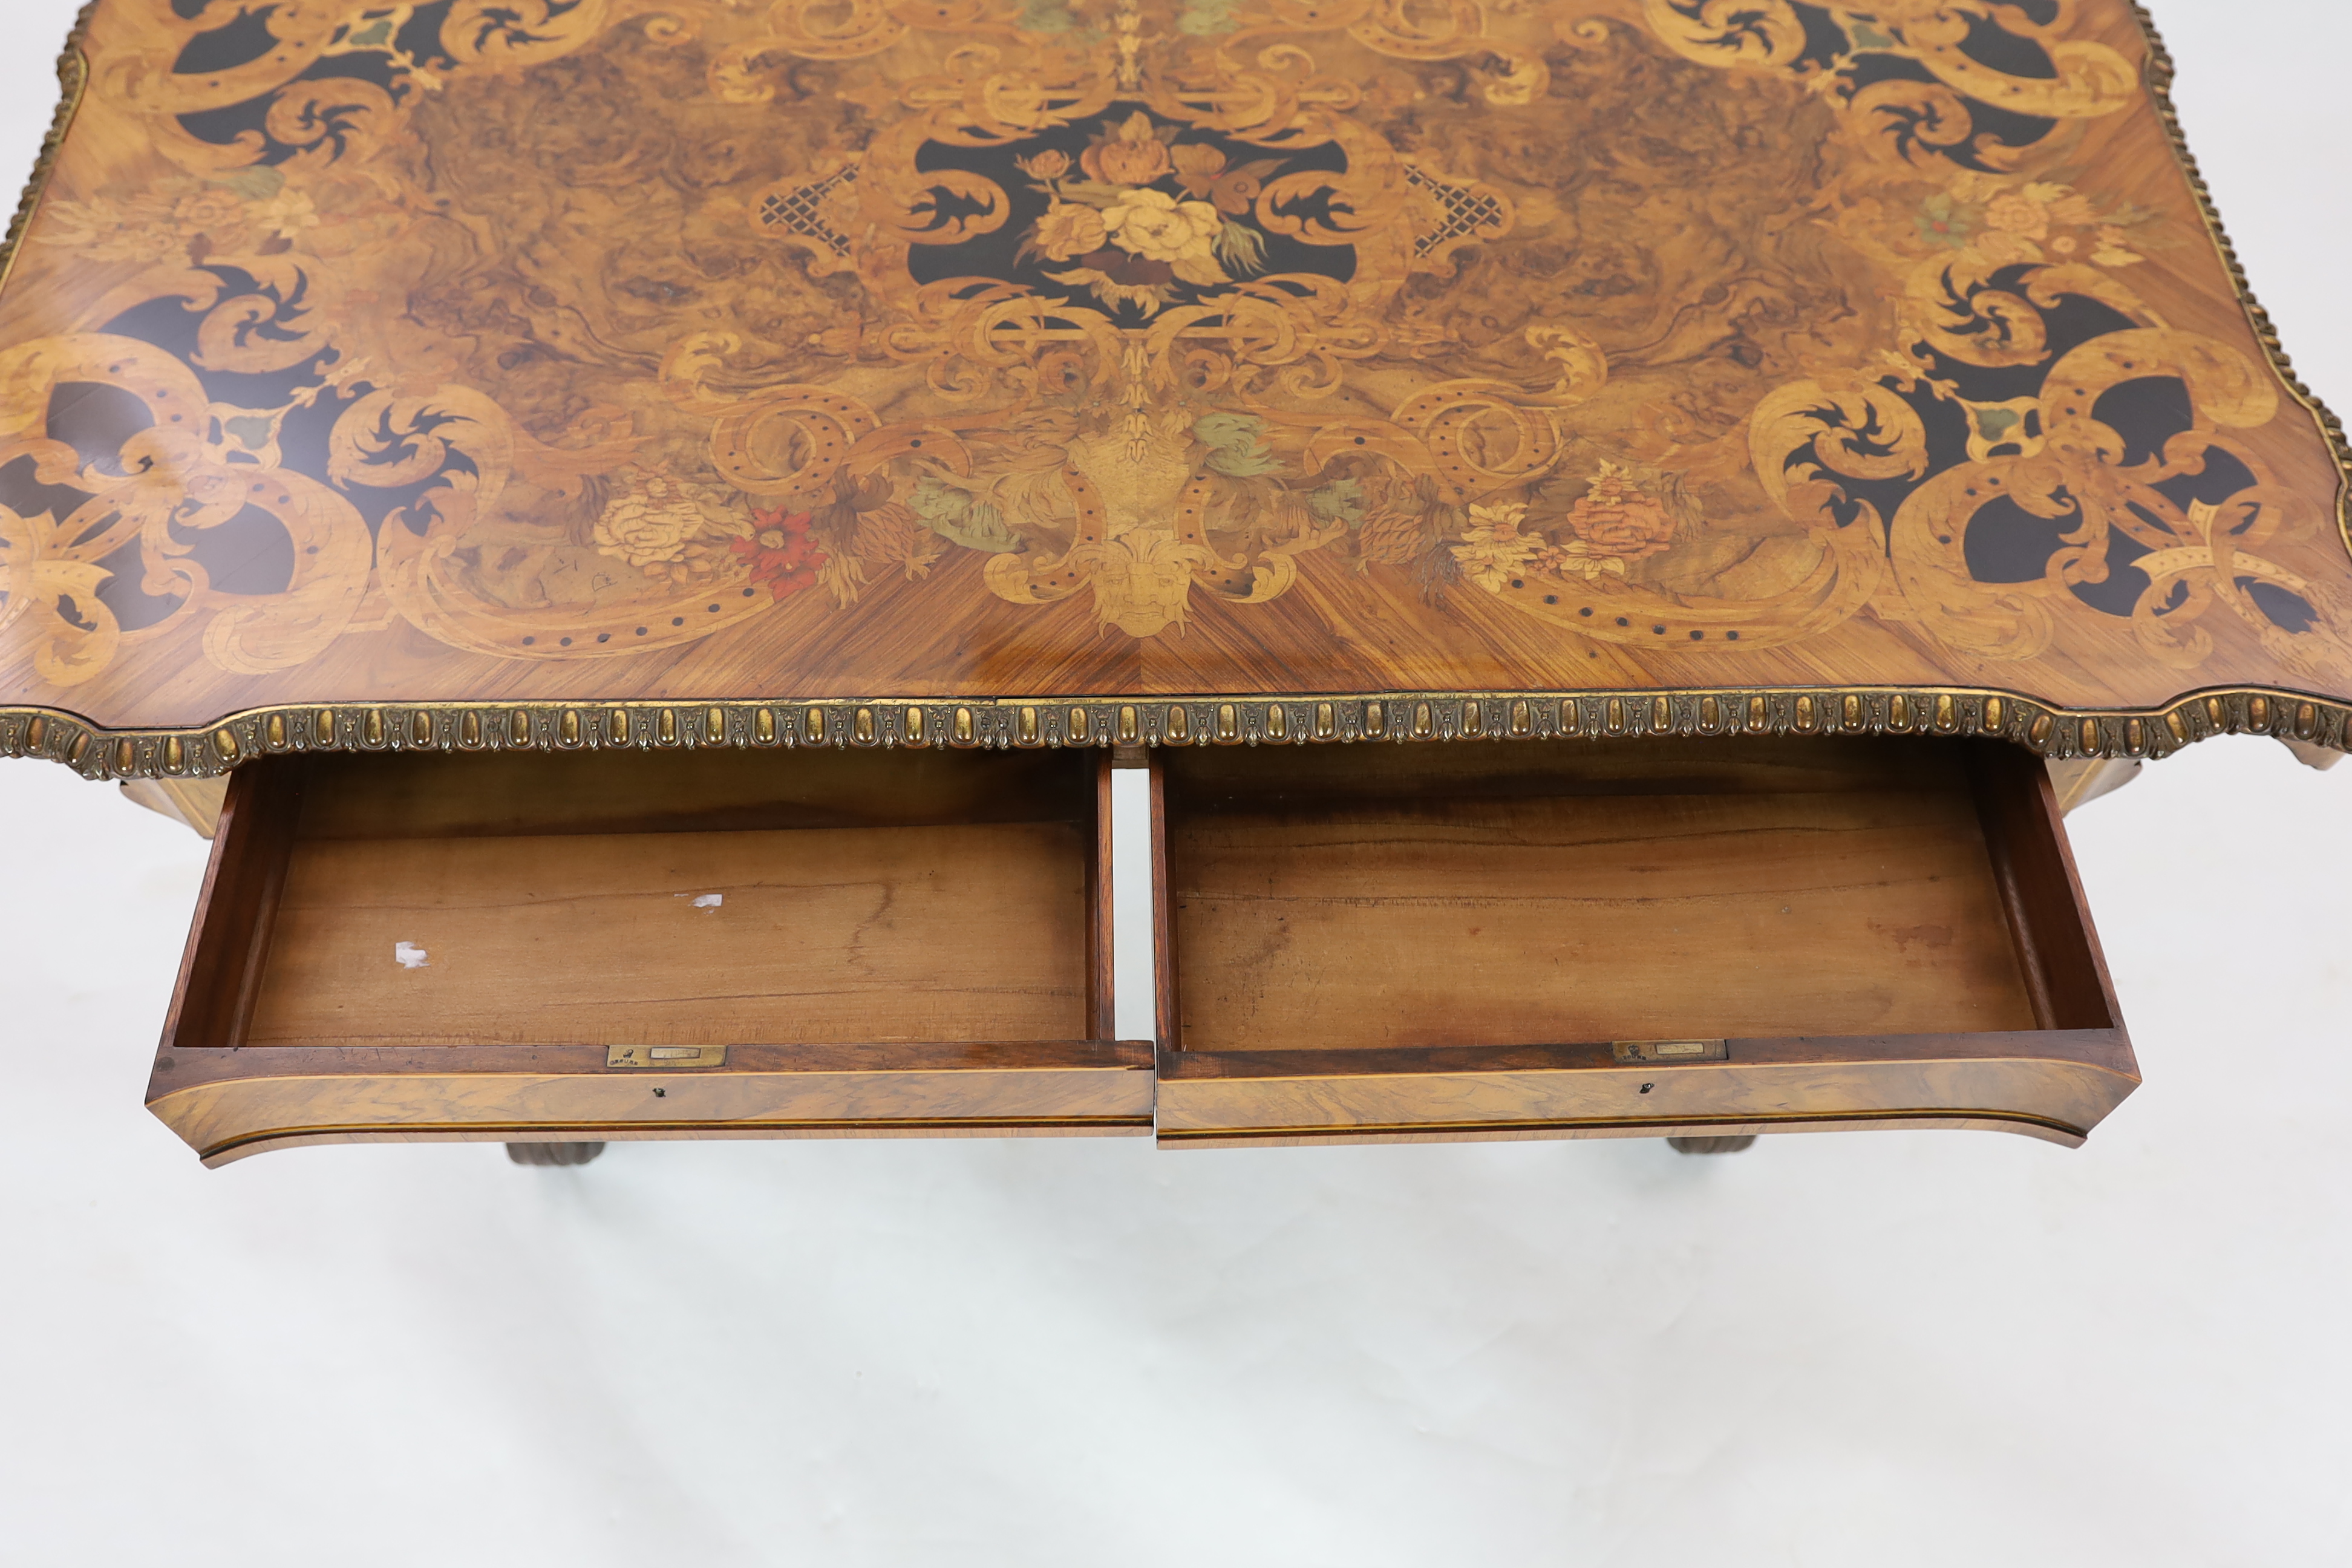 A good Victorian ormolu mounted walnut and marquetry centre table